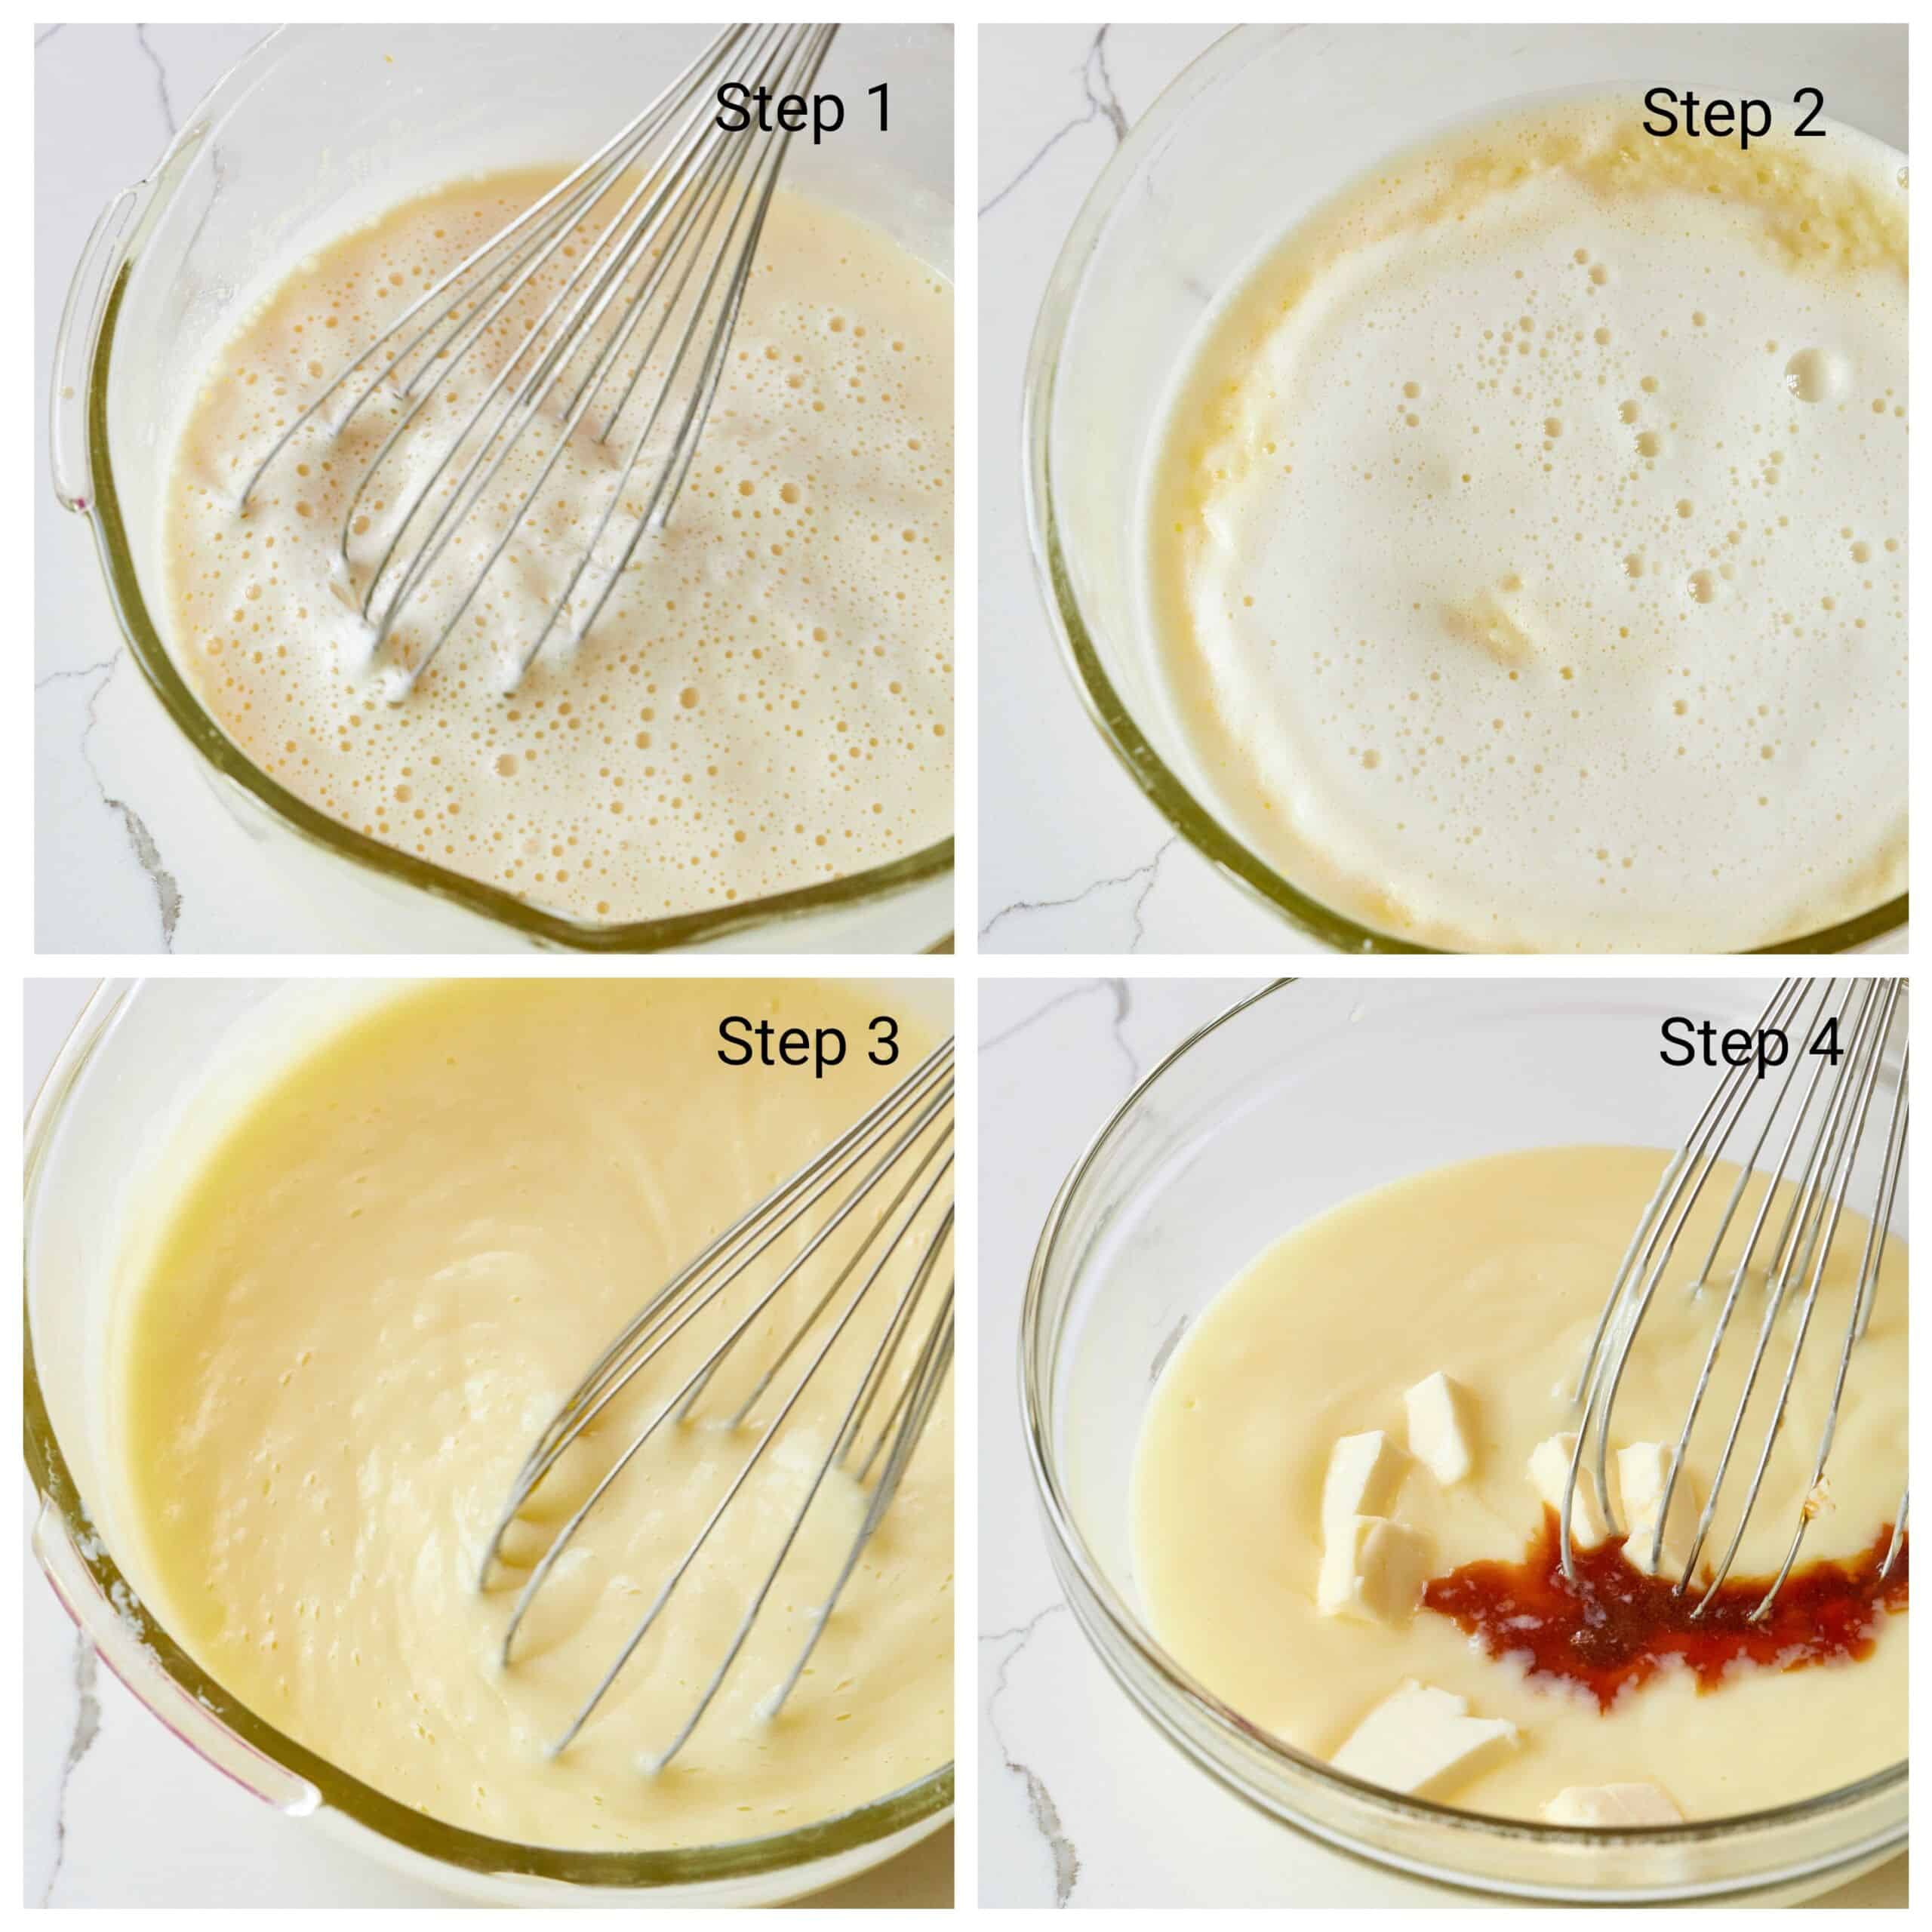 Step-by-step instructions on how to make 10-Minute Microwave Banana Pudding: In a bowl, whisk together egg yolks, sugar, cornstarch, salt, and milk until smooth. Microwave on high starting with 3-4 minutes. Carefully remove, whisk, and microwave again.  Once the pudding starts to thicken and bubble, give it a final whisk with caution! Microwave one more time. Timing may vary depending on the power of your microwave. Once thickened, whisk in butter and vanilla extract.